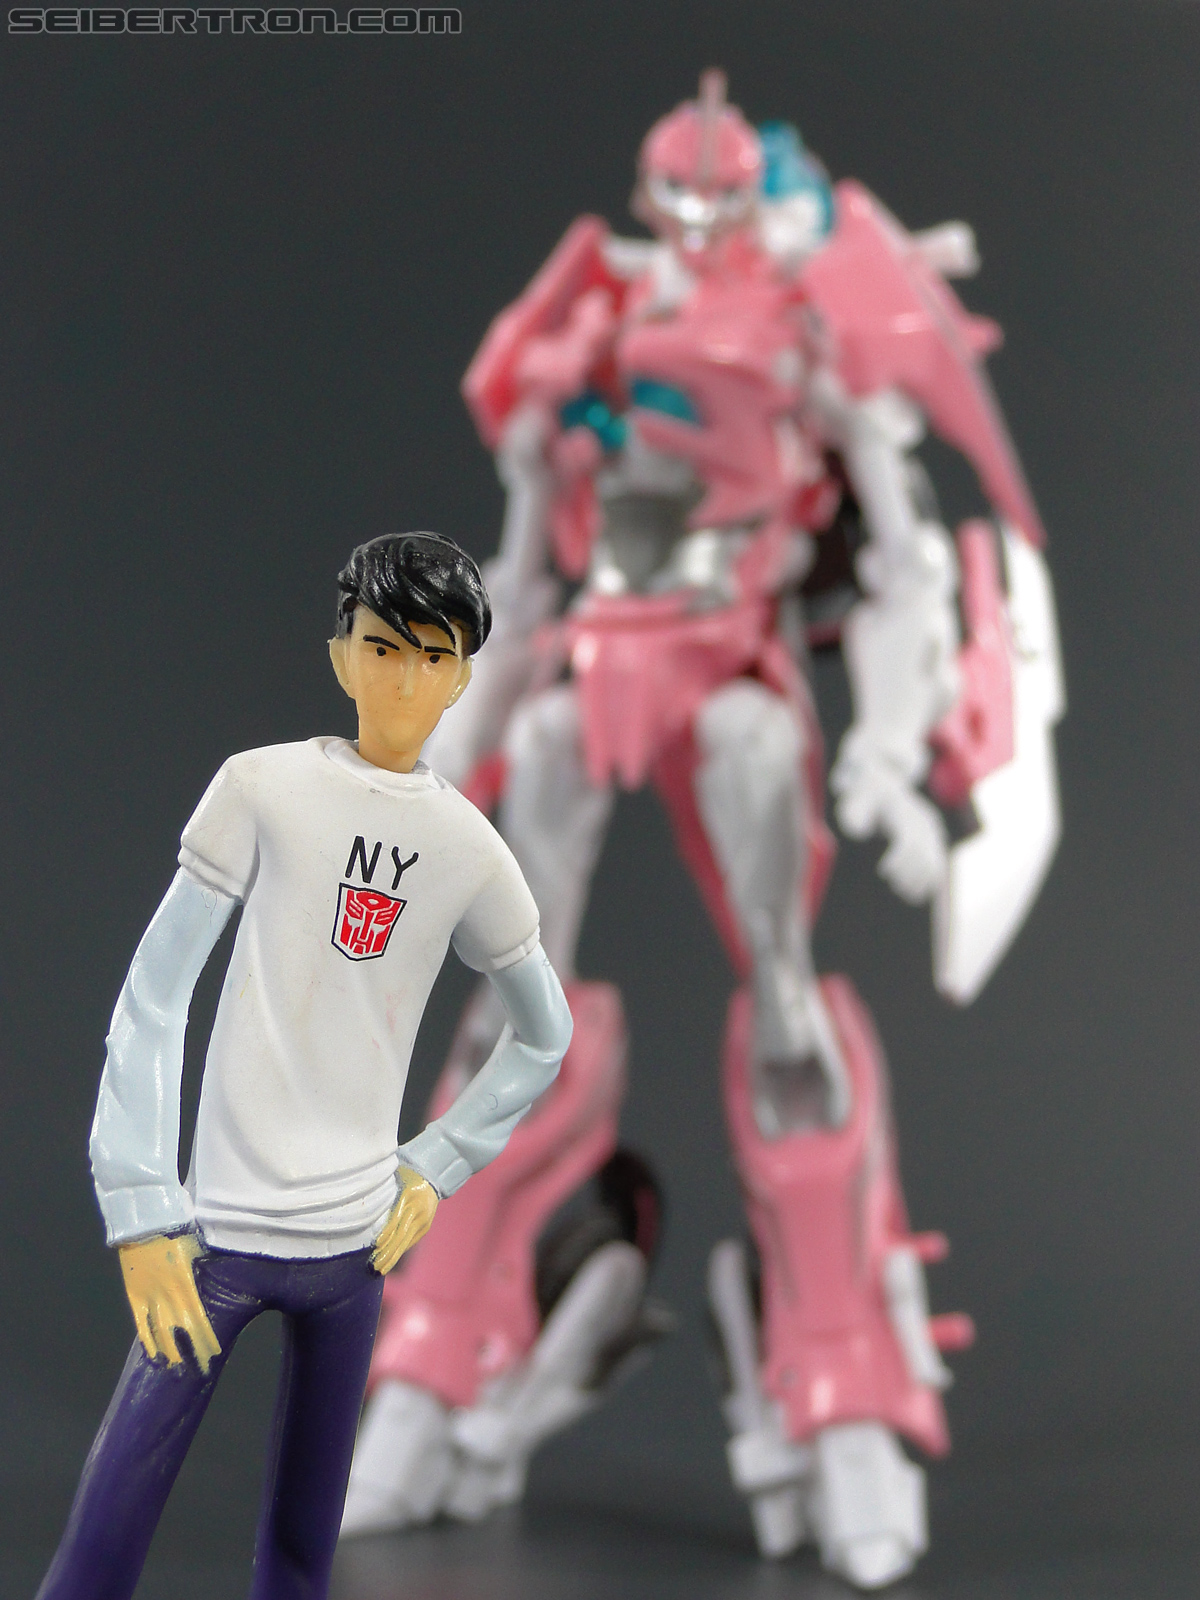 Transformers Prime: First Edition Jack Darby (NYCC) (Image #54 of 66)